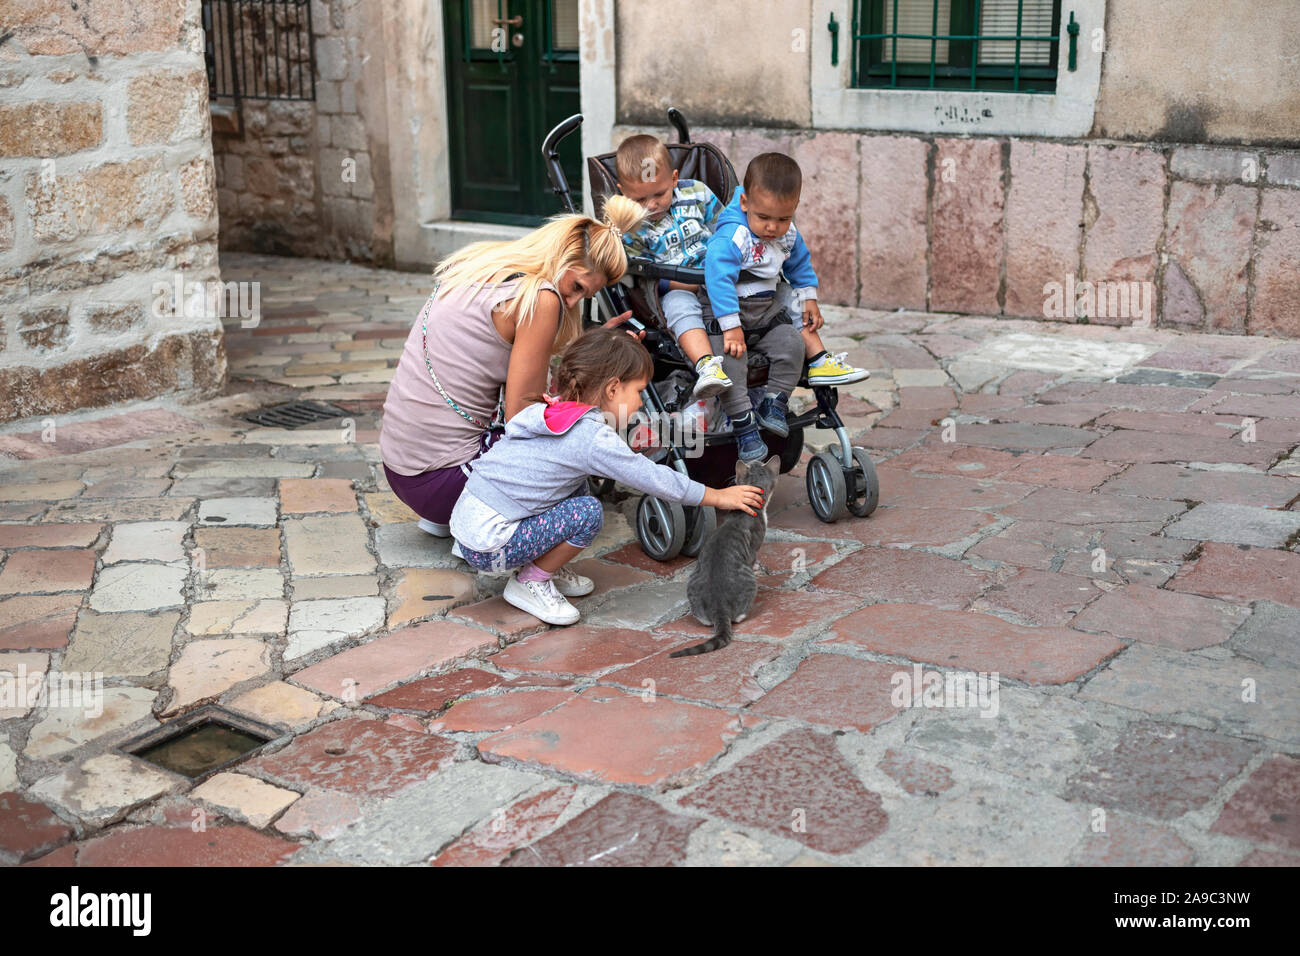 Montenegro, Sep 22, 2019: Mother and baby brothers watching little girl while playing with pussycat on the street in Kotor Old Town Stock Photo